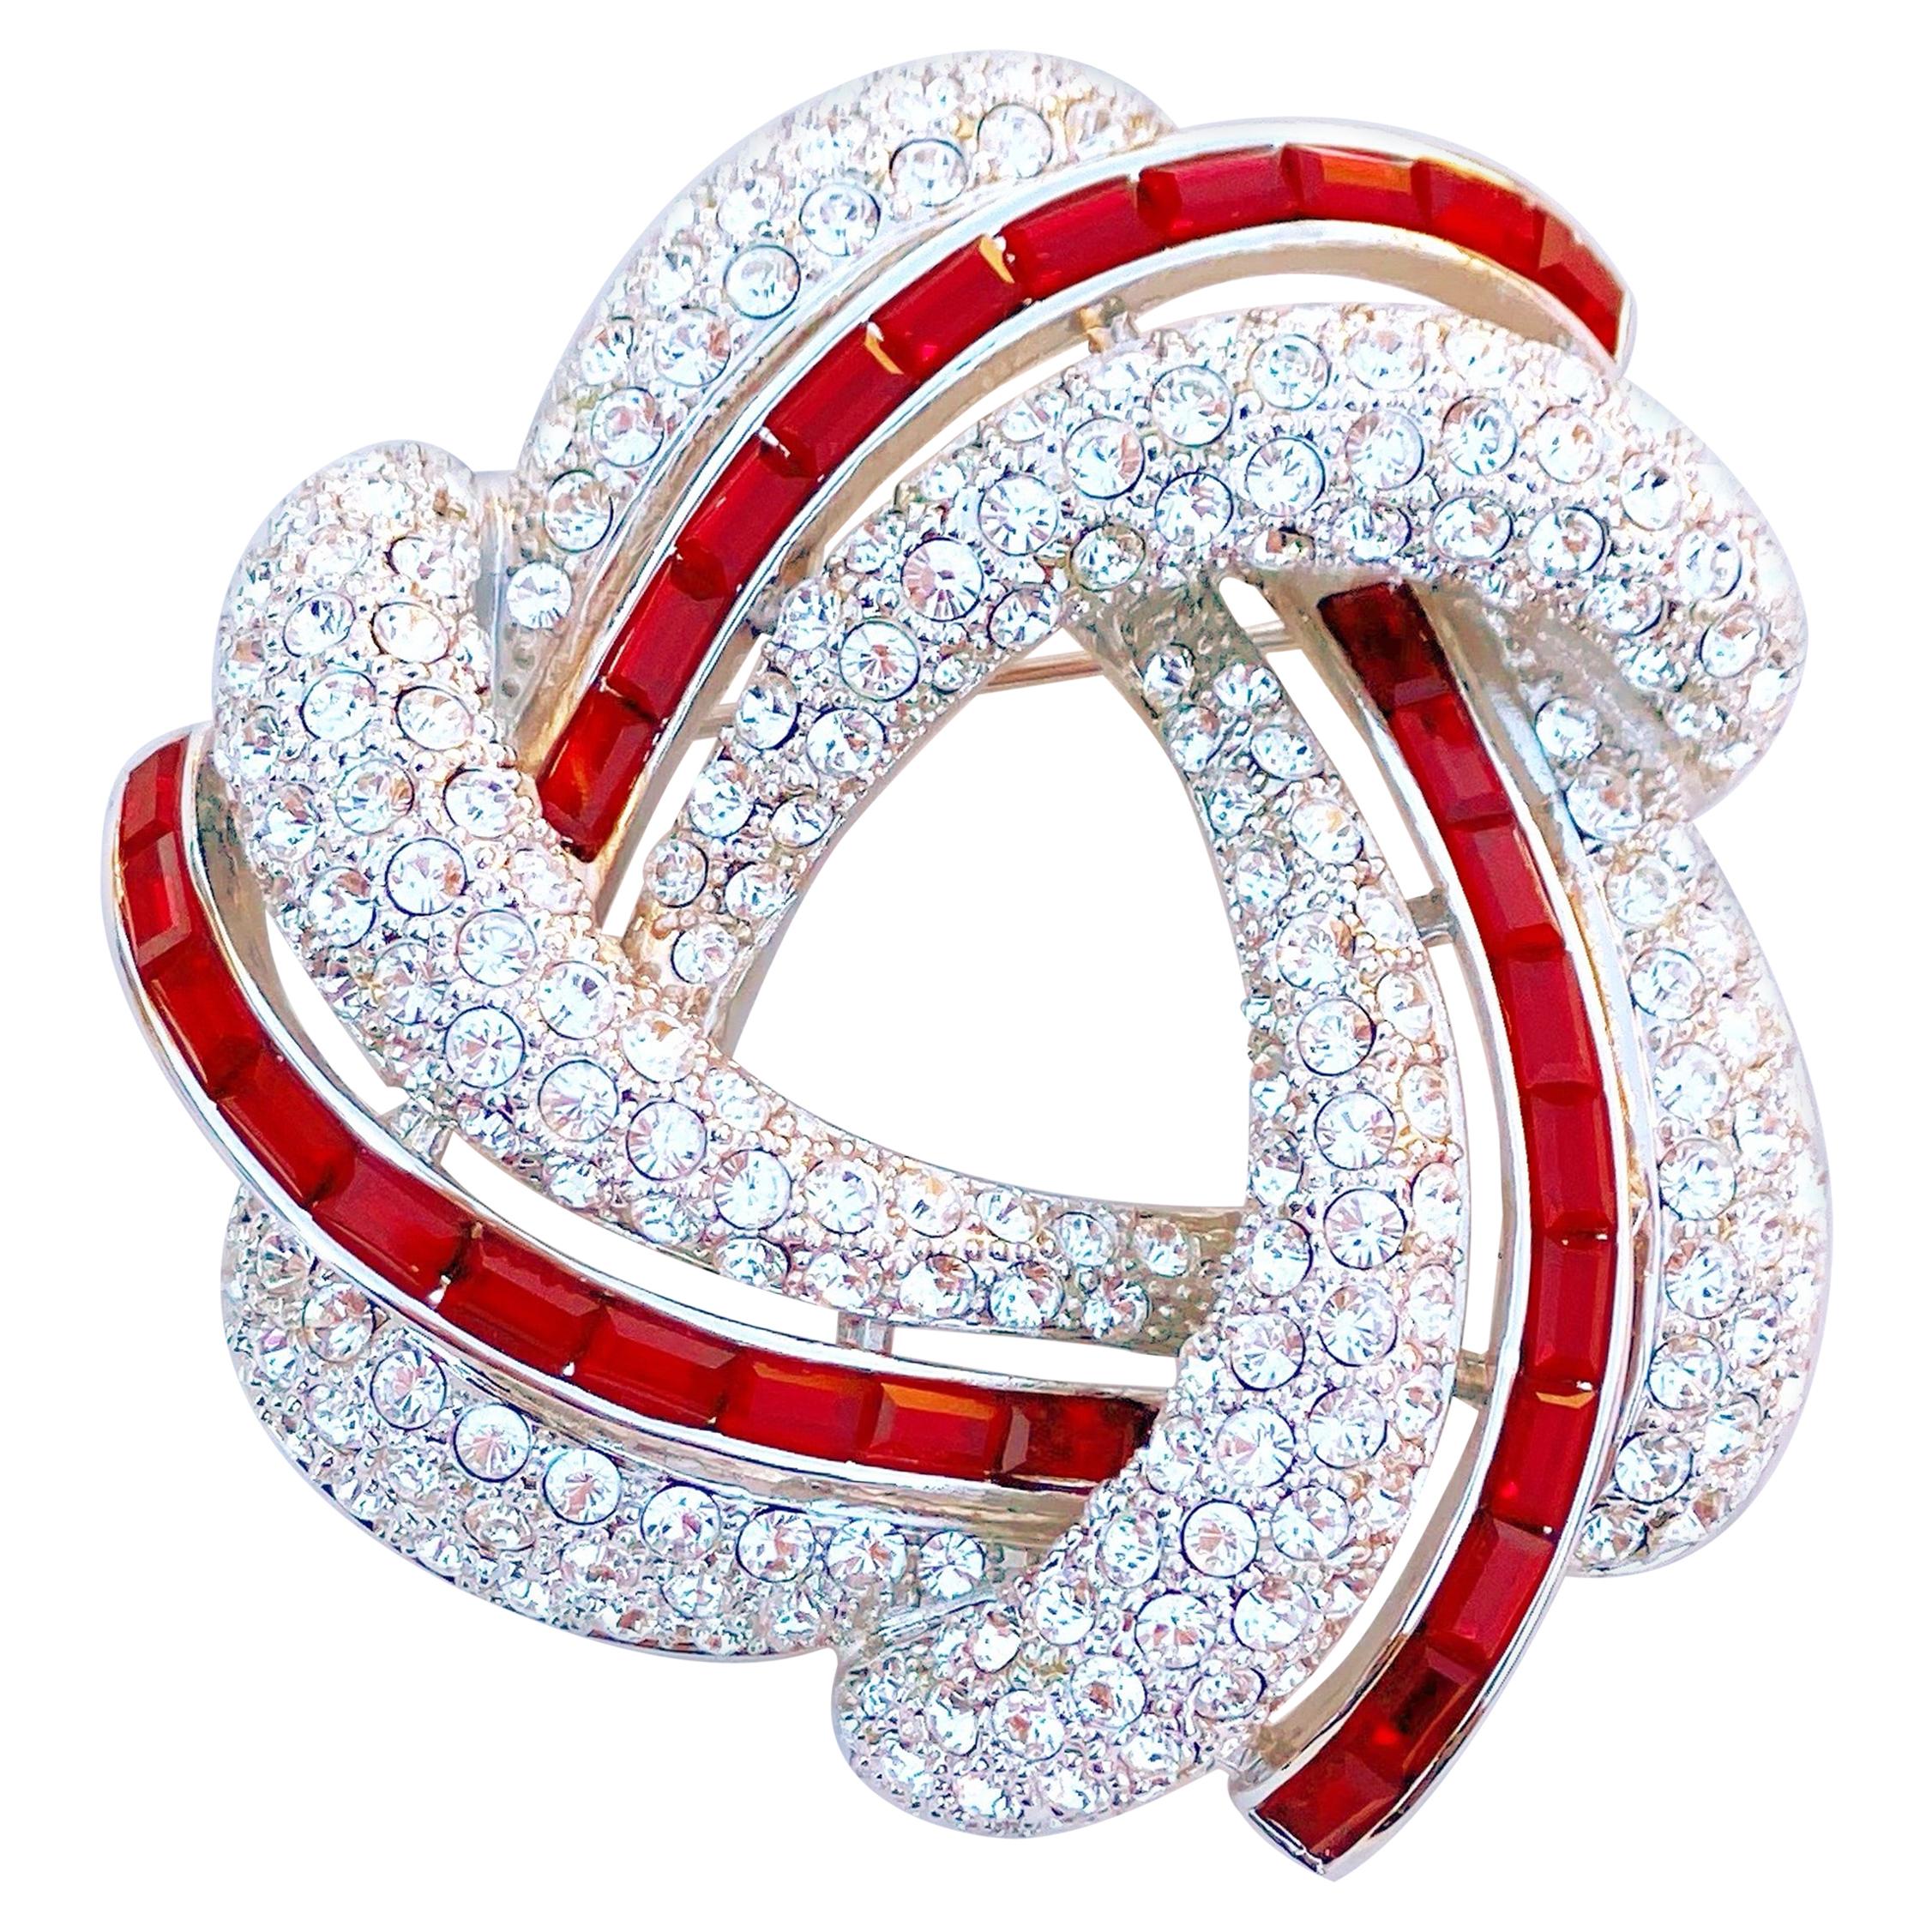 Silver Knot Brooch w Crystal Pavé & Red Crystal Baguettes by Nolan Miller, 1990s